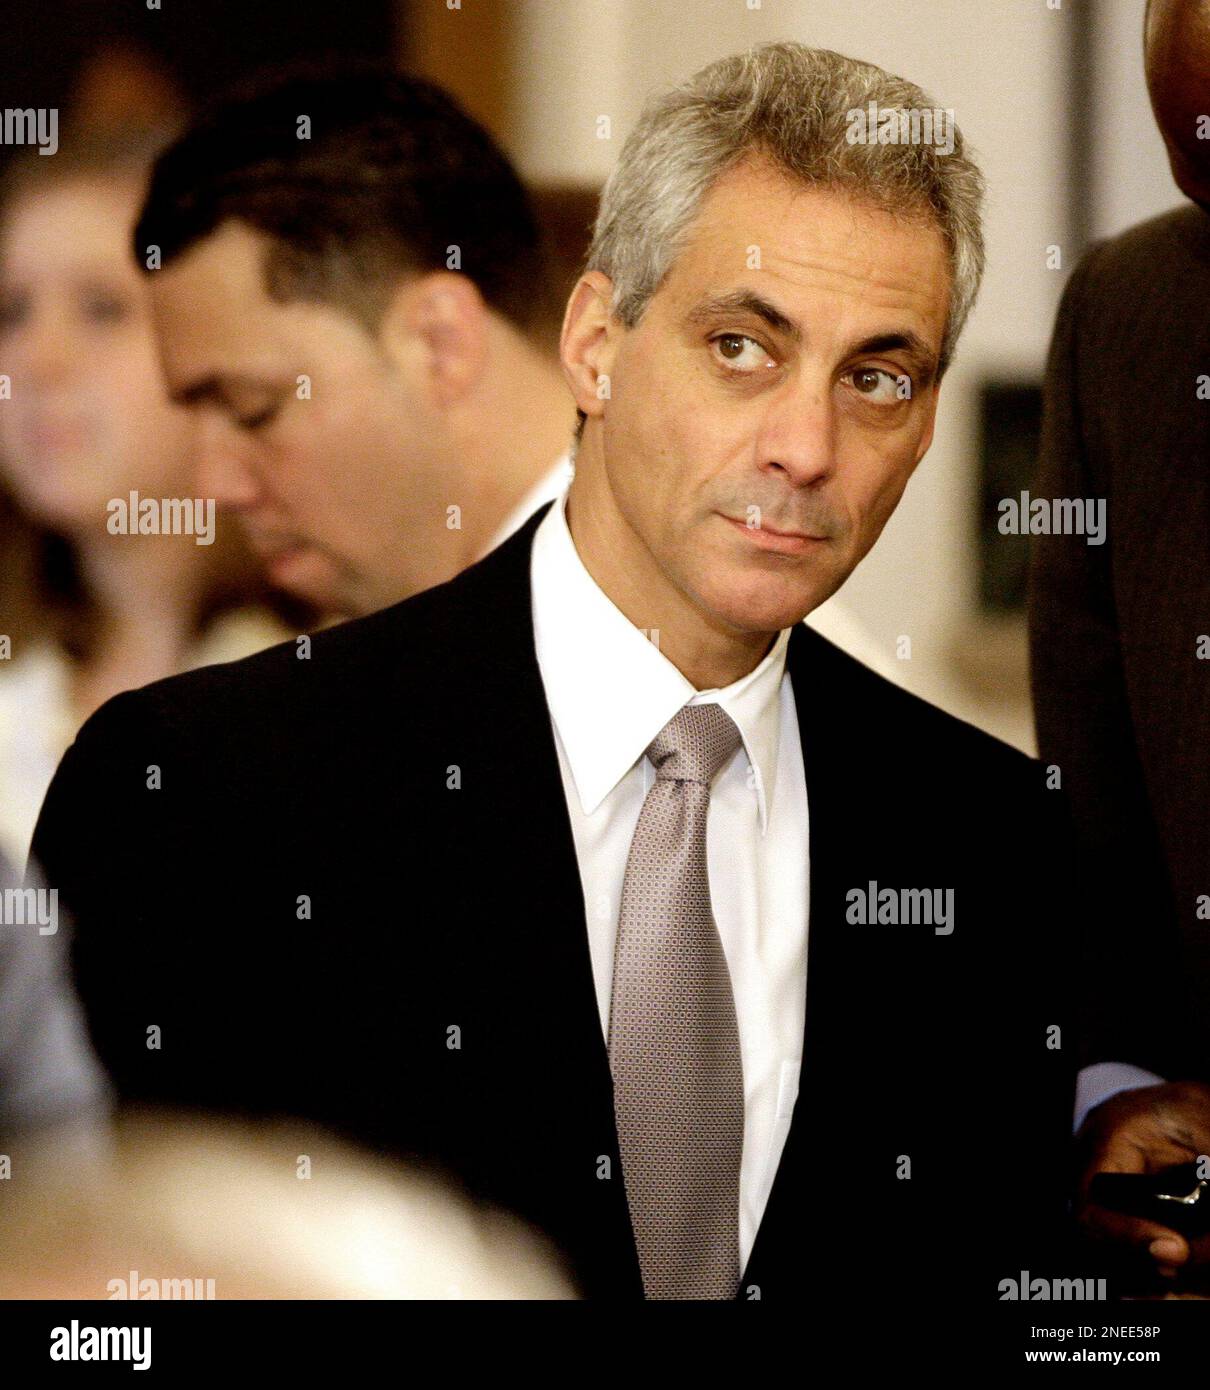 White House Chief of Staff Rahm Emanuel, watches President Barack Obama speak in the East Room of the White House in Washington, Monday, Jan. 25, 2010, during a ceremony where the president honored the NBA basketball champion Los Angeles Laker. (AP Photo/Alex Brandon) Foto Stock